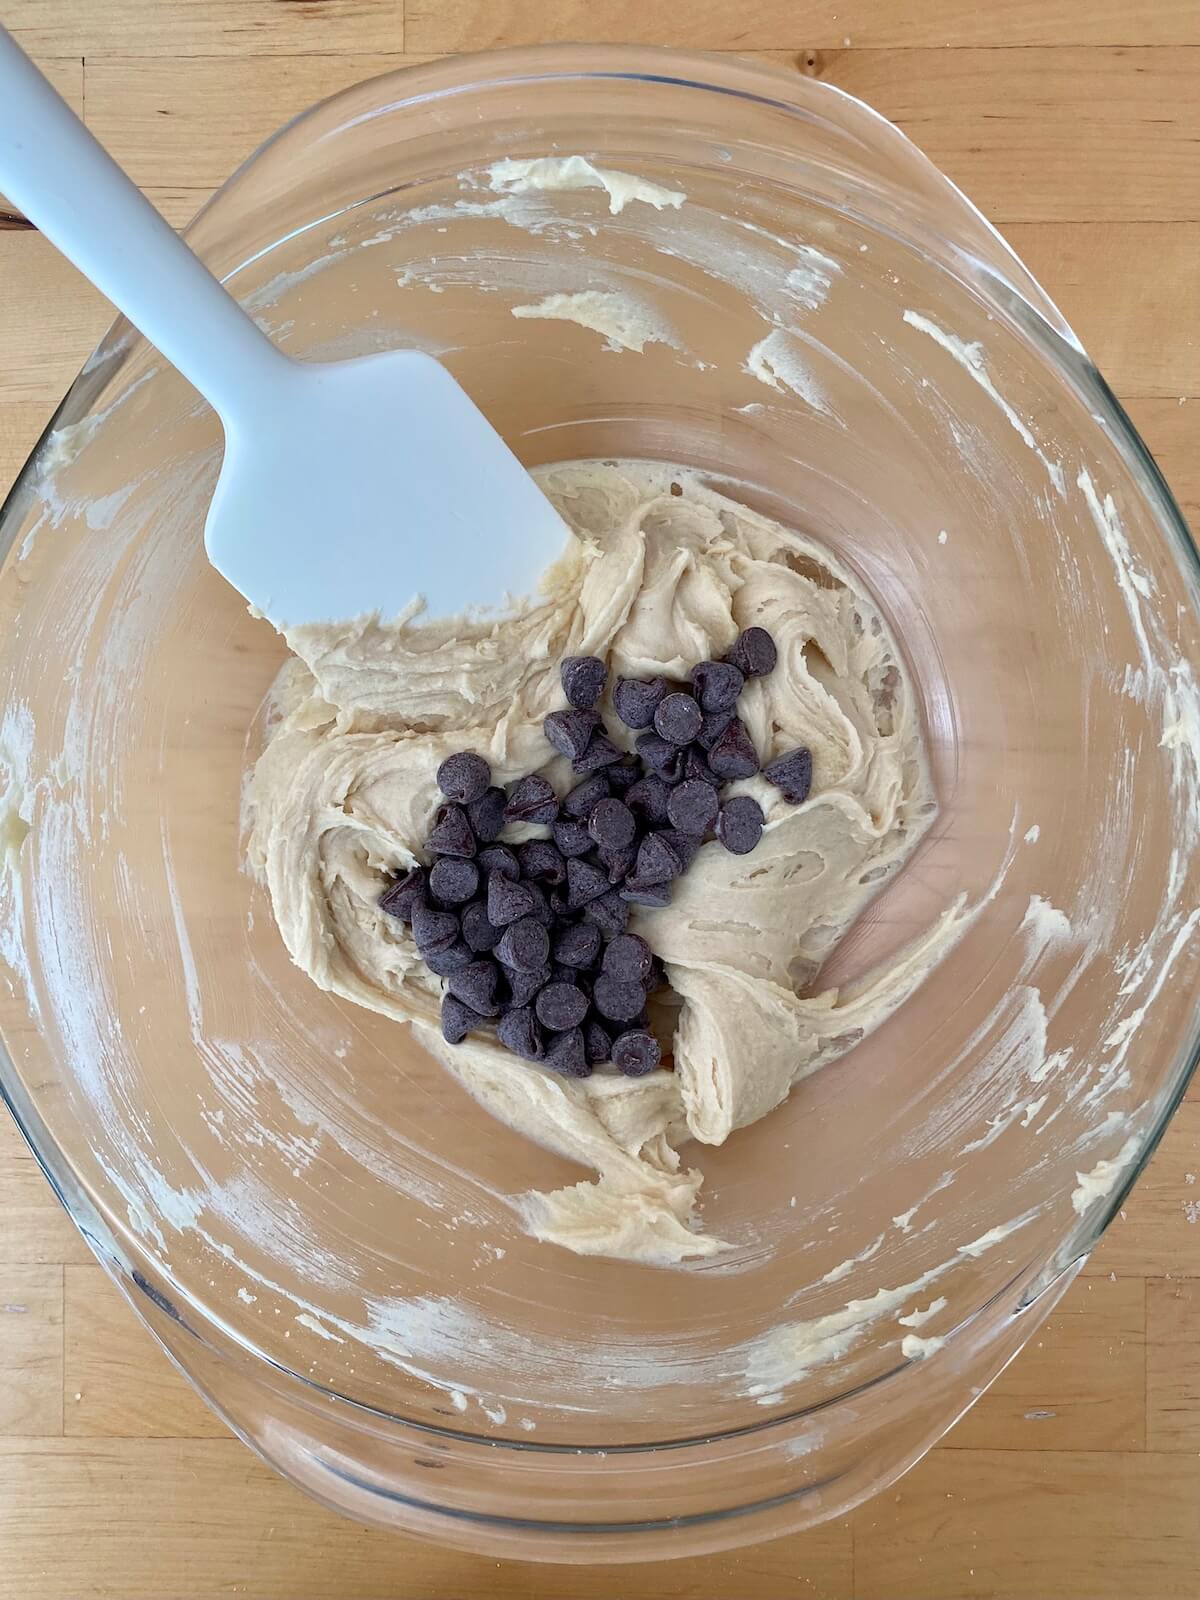 The chocolate chip cookie dough in a glass mixing bowl.